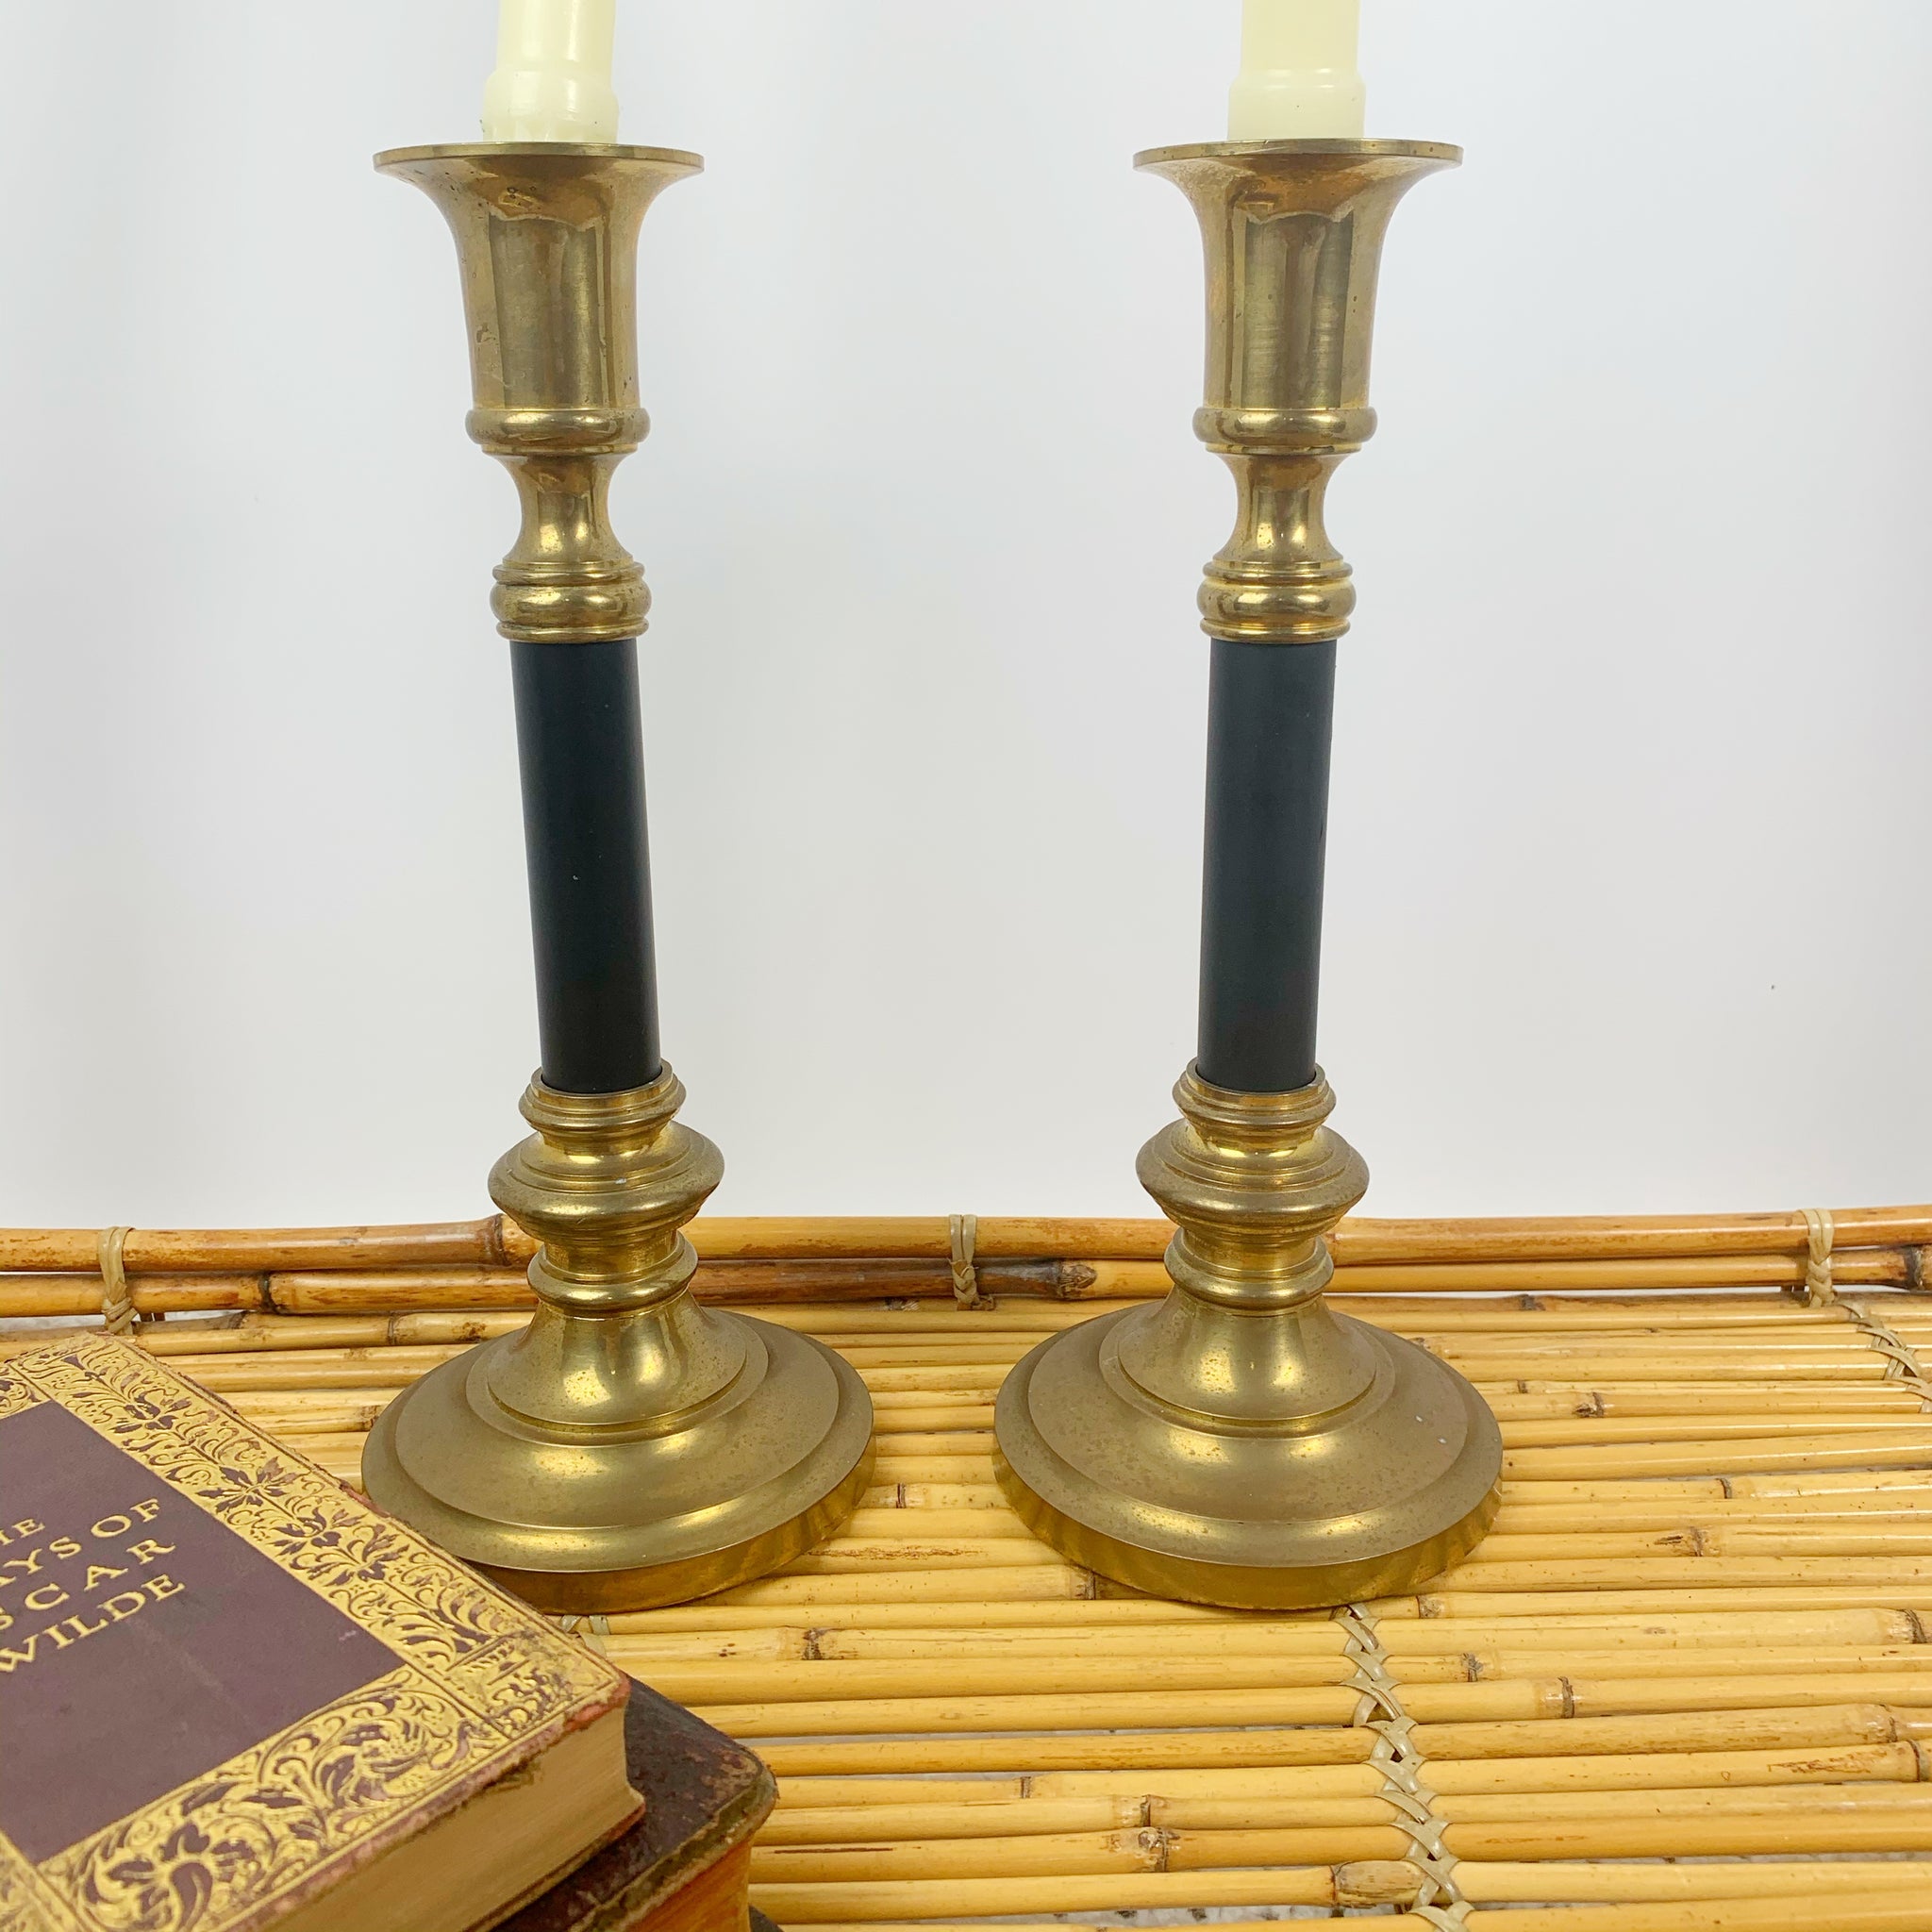 Brass candlestick holders, sold individually in varying sizes. Elevate your  ambiance with these timeless brass candlesticks